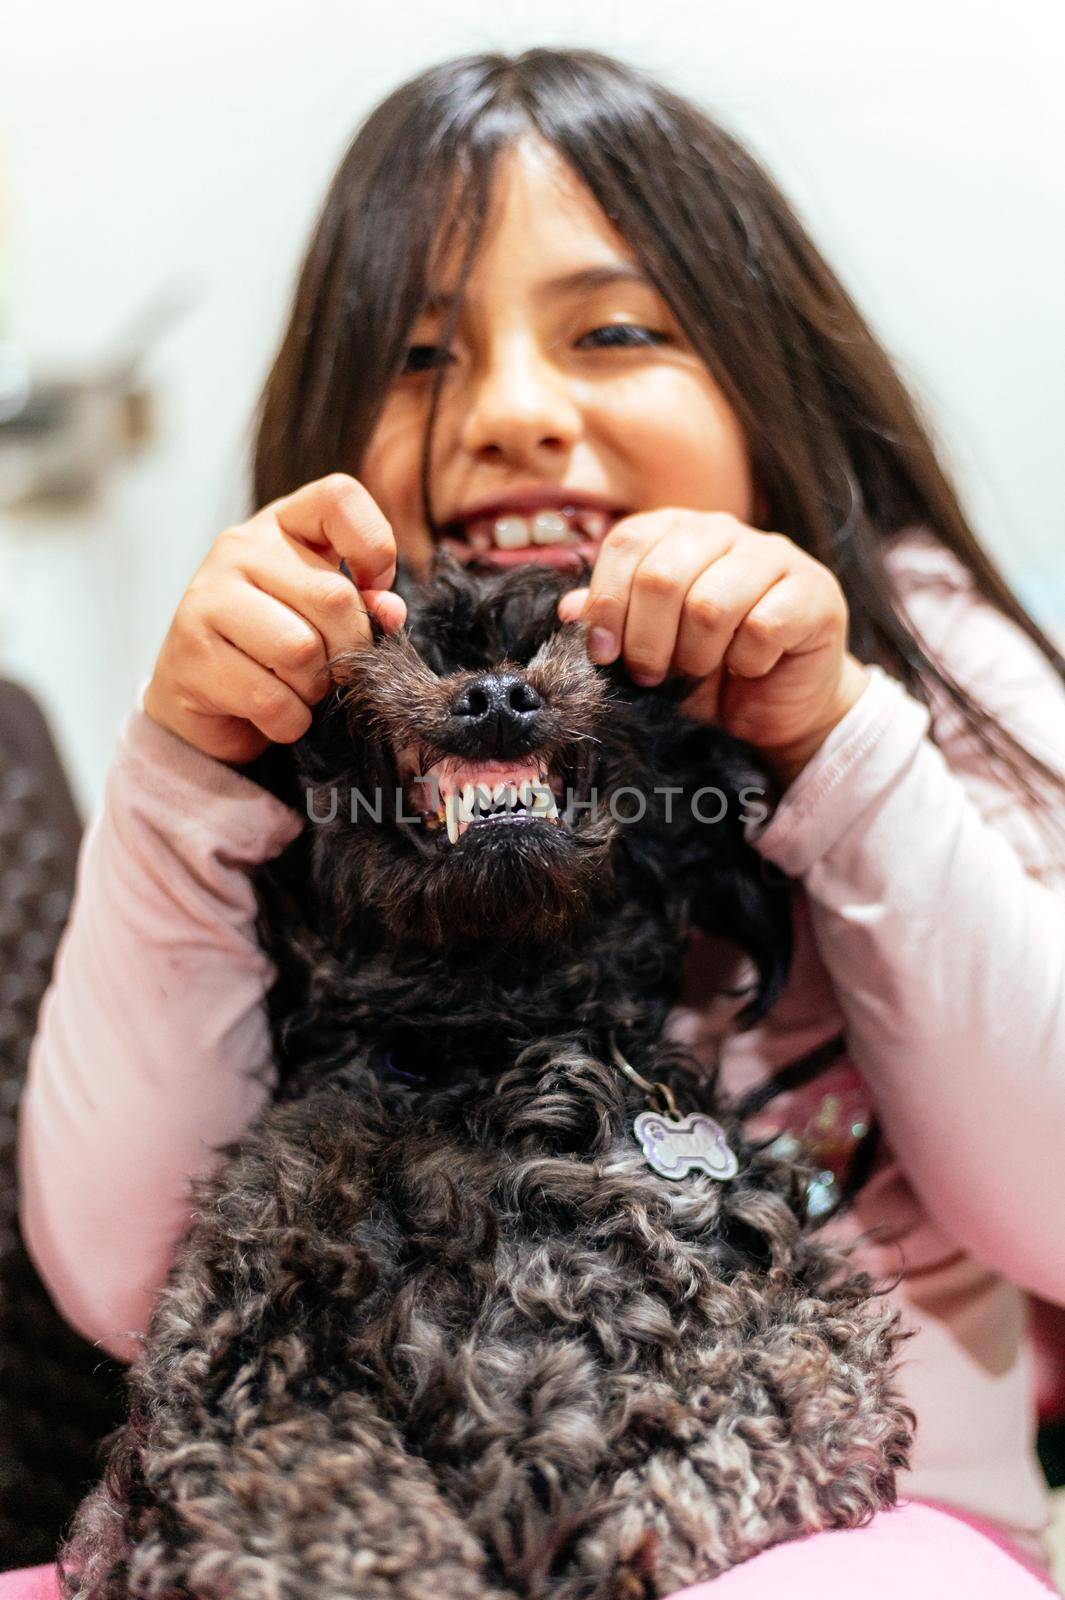 Adorable smiling little girl child schoolgirl holding and playing with pet dog. Best friends